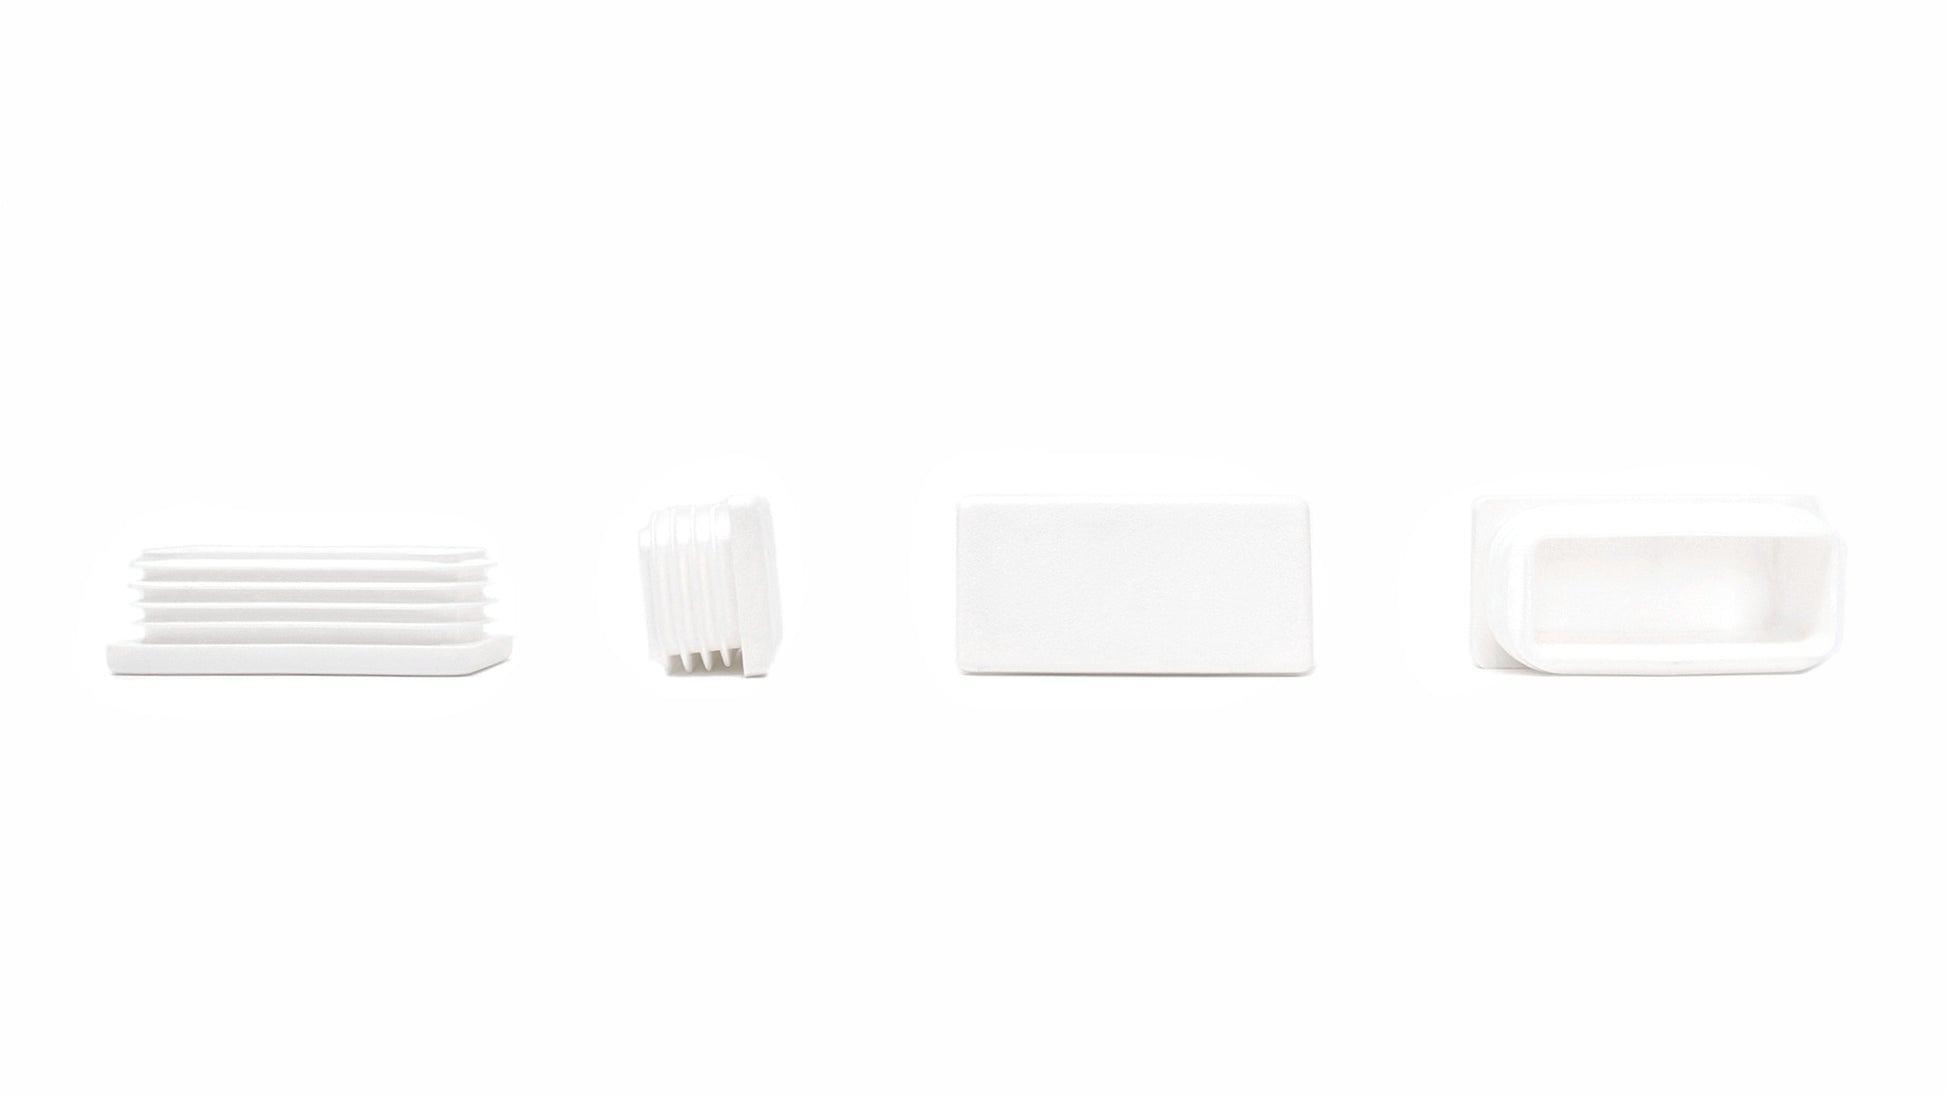 Rectangular Tube Inserts 60mm x 30mm White | Made in Germany | Keay Vital Parts - Keay Vital Parts